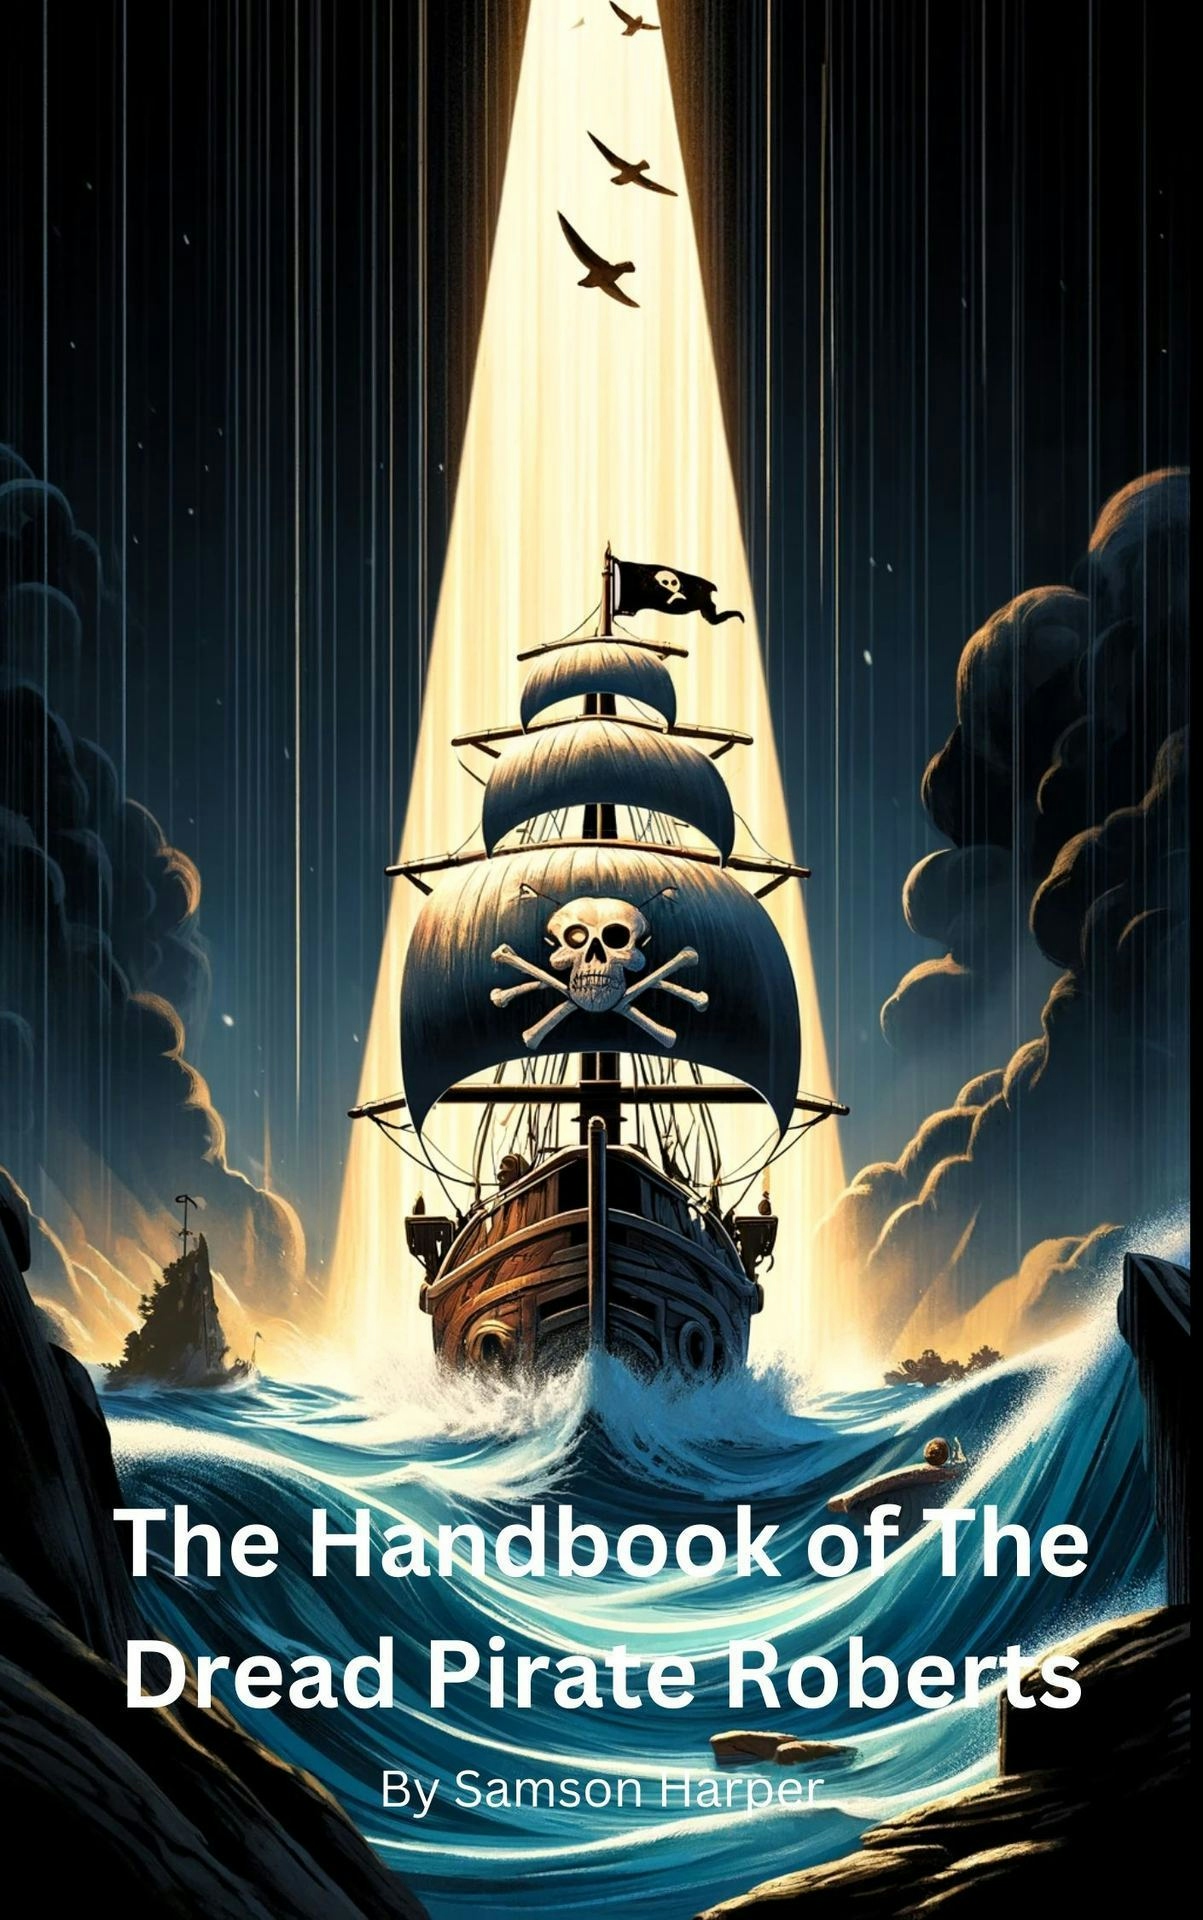 The Handbook of the Dread Pirate Roberts: Navigating Ethical Dilemmas